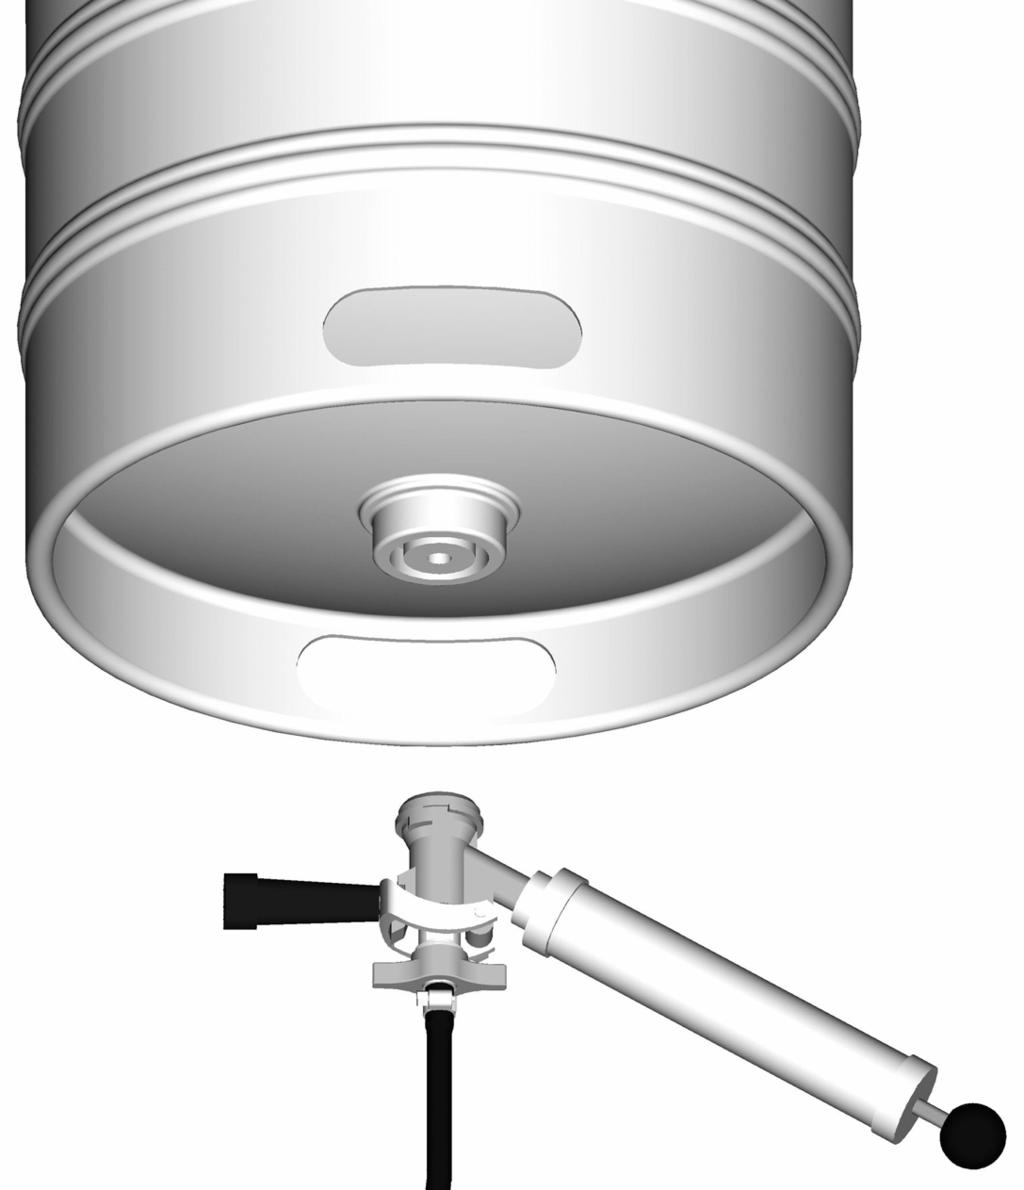 Pull pump lever out and push downward until locked in position. 5. Pull the tap lever to the ON position. 6. If no liquid flows from tap, turn tap lever off and pump the keg to increase pressure.